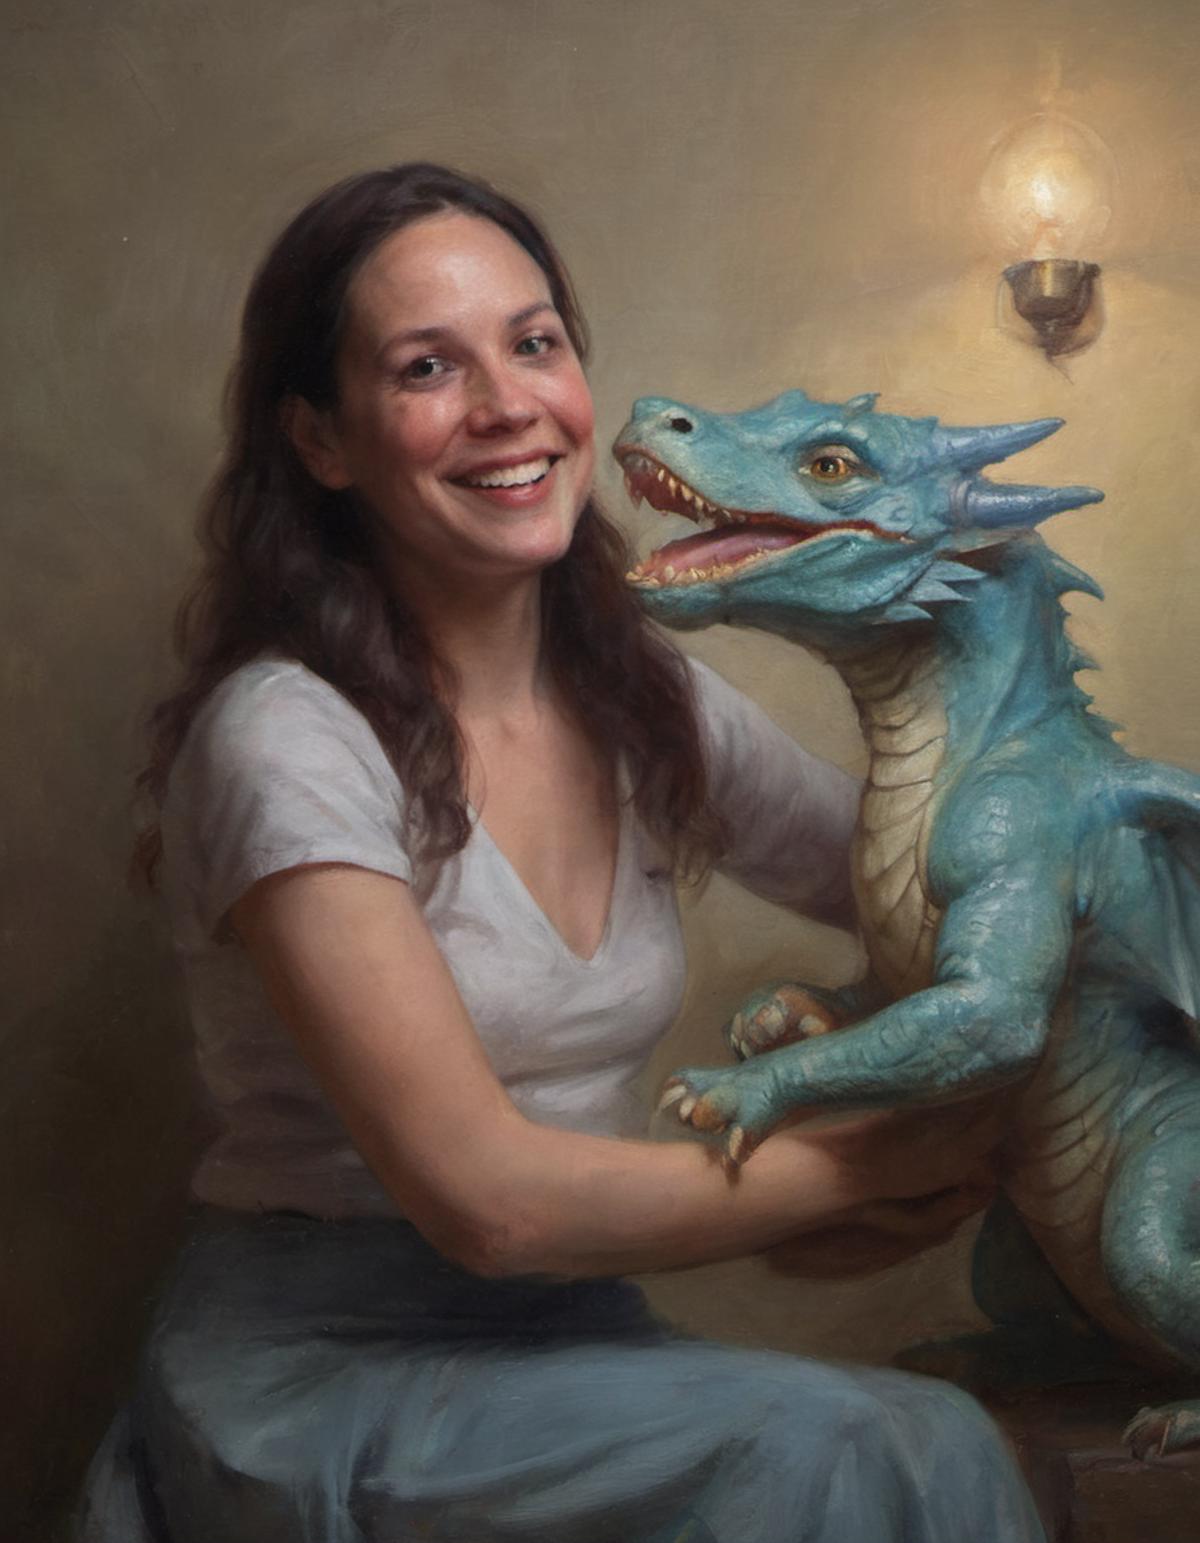 A woman holding a blue dragon sculpture in her lap.